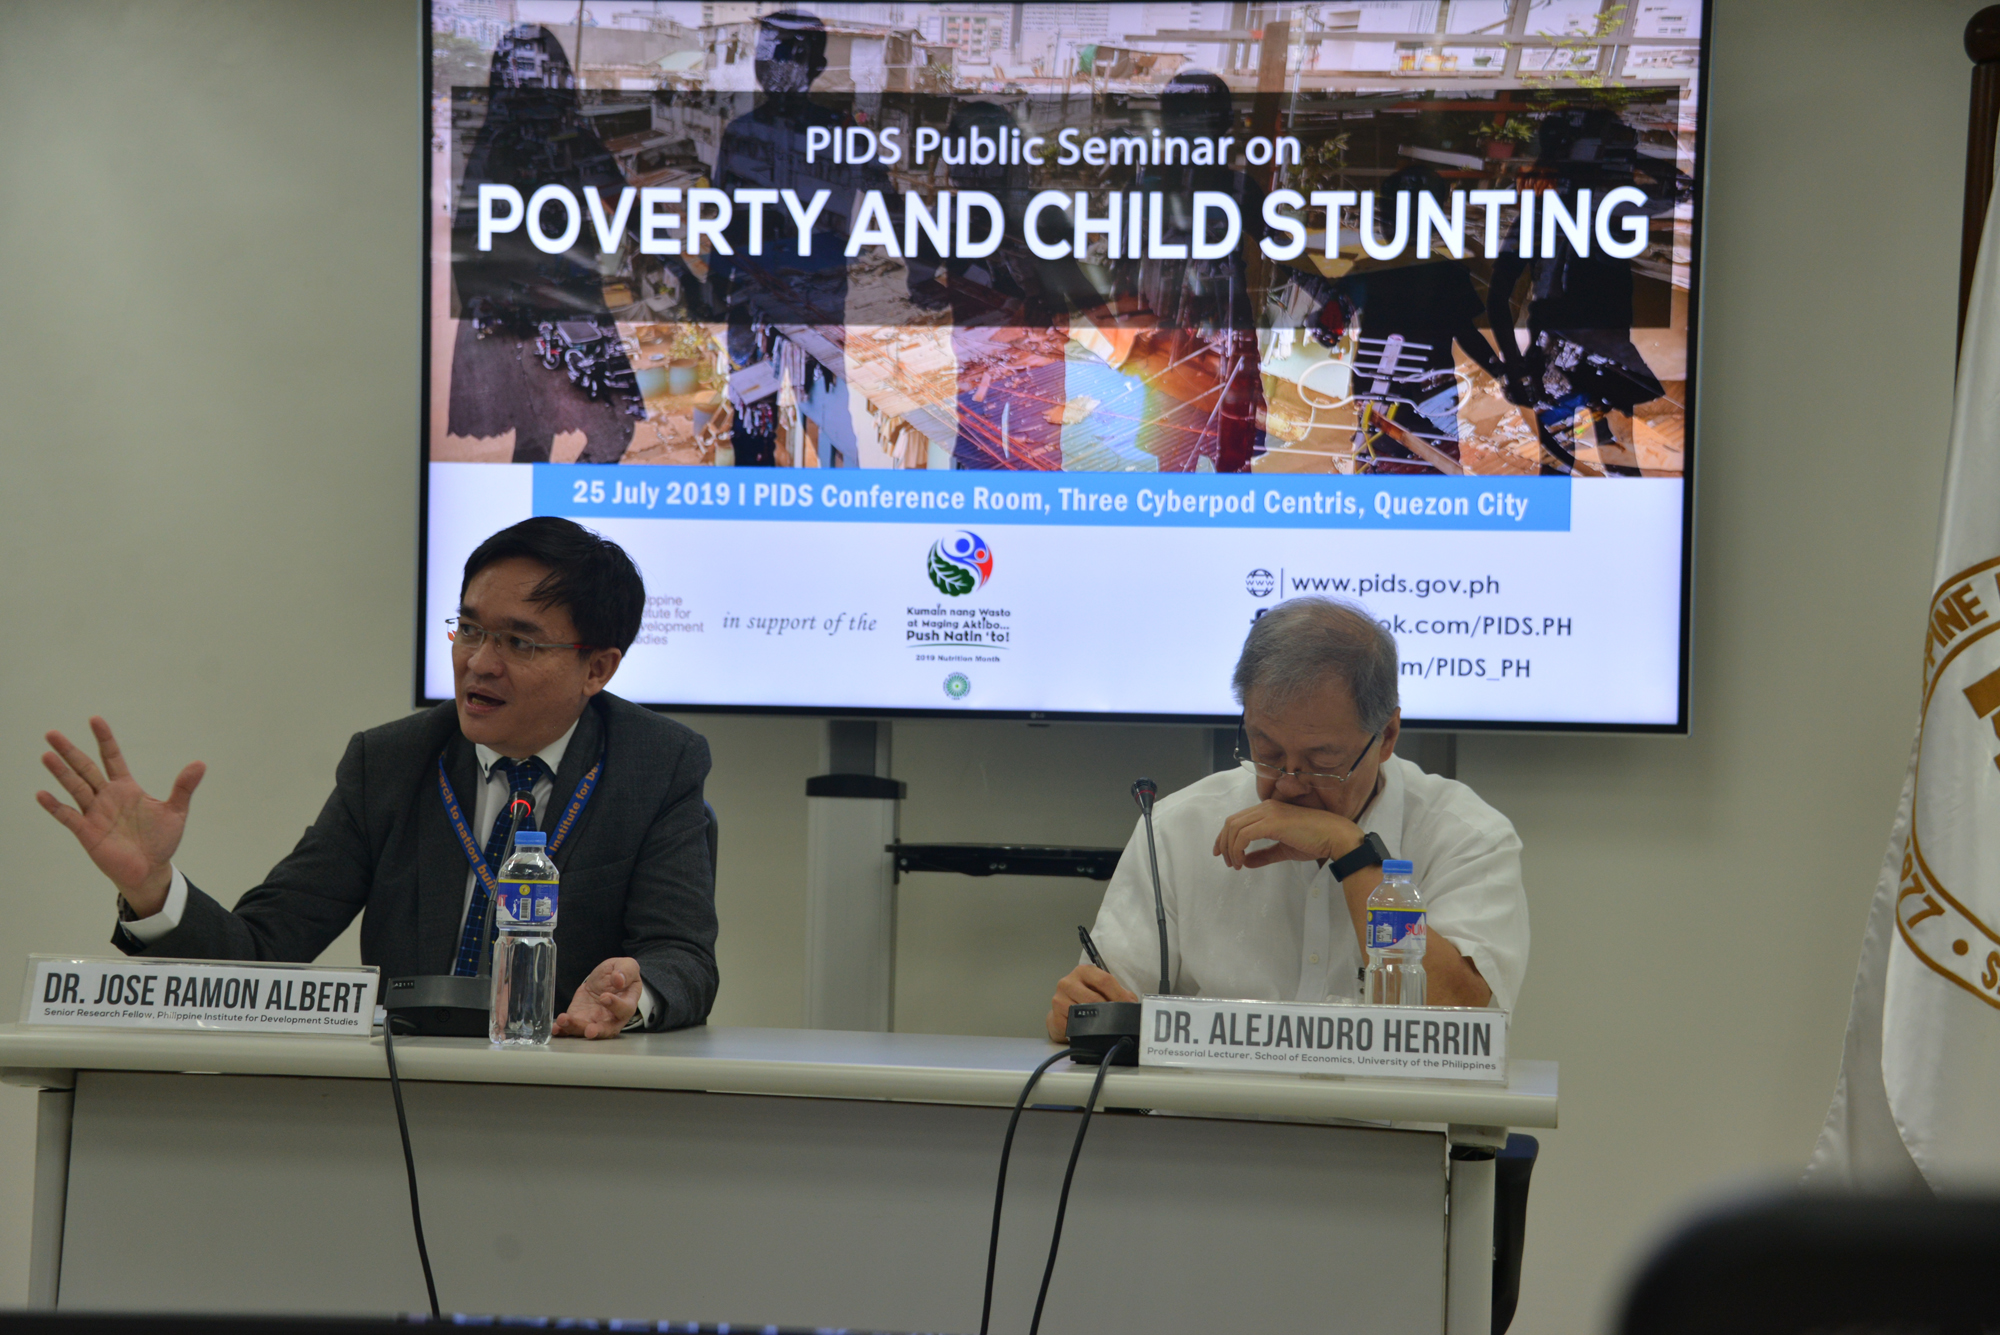 Public Seminar on Poverty and Child Stunting-pids-poverty-14-20190725.jpg